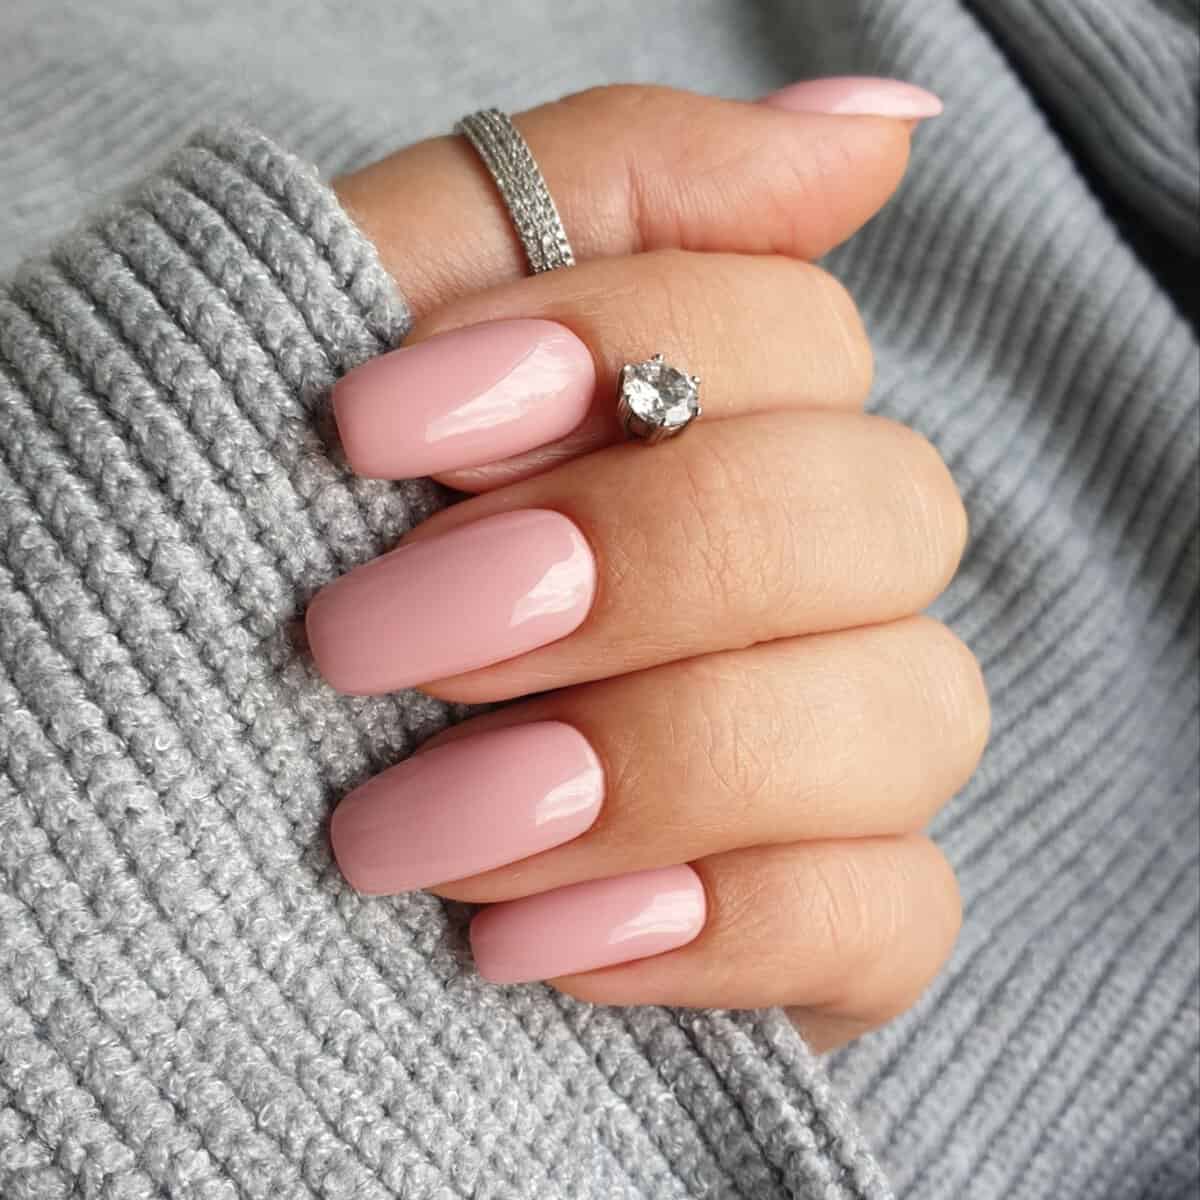 light pink manicure with gray textured sweater background 